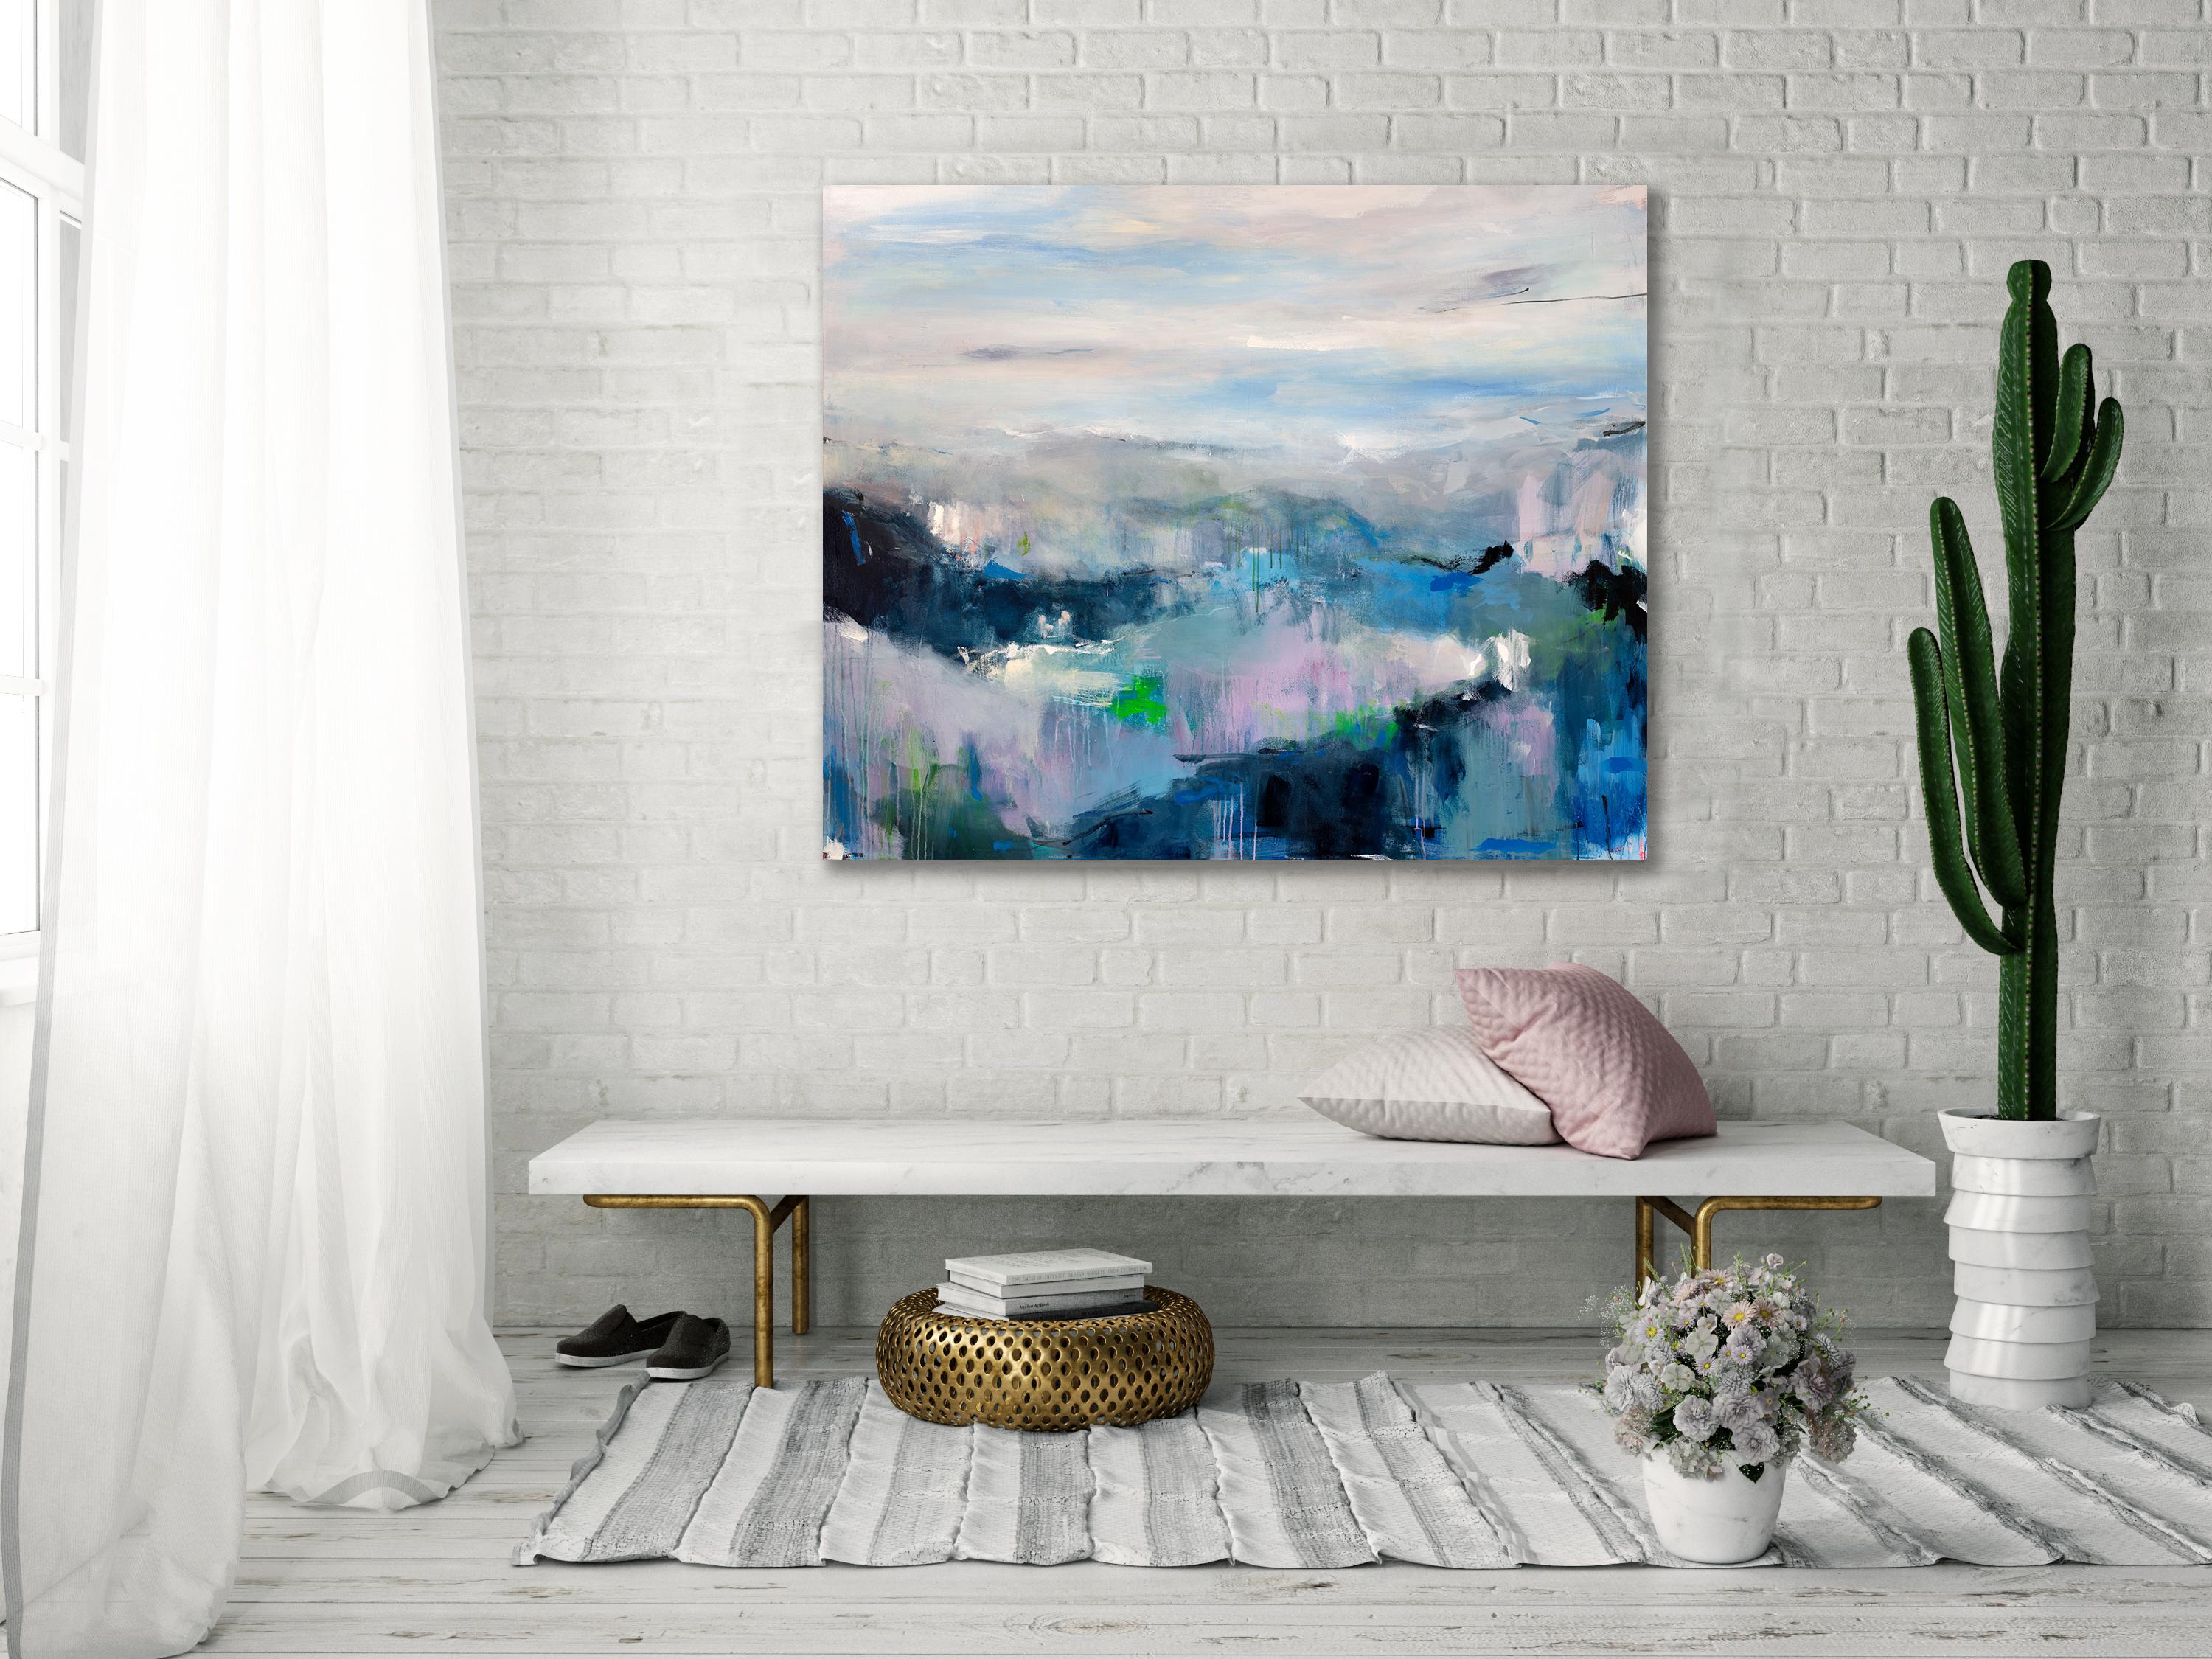 This large-scale contemporary painting is made with acrylic paint on gallery-wrapped canvas. While abstract, it features the loose aesthetic of a horizon line, giving it the aesthetic of an abstract landscape. Drips and layers of blended blue and